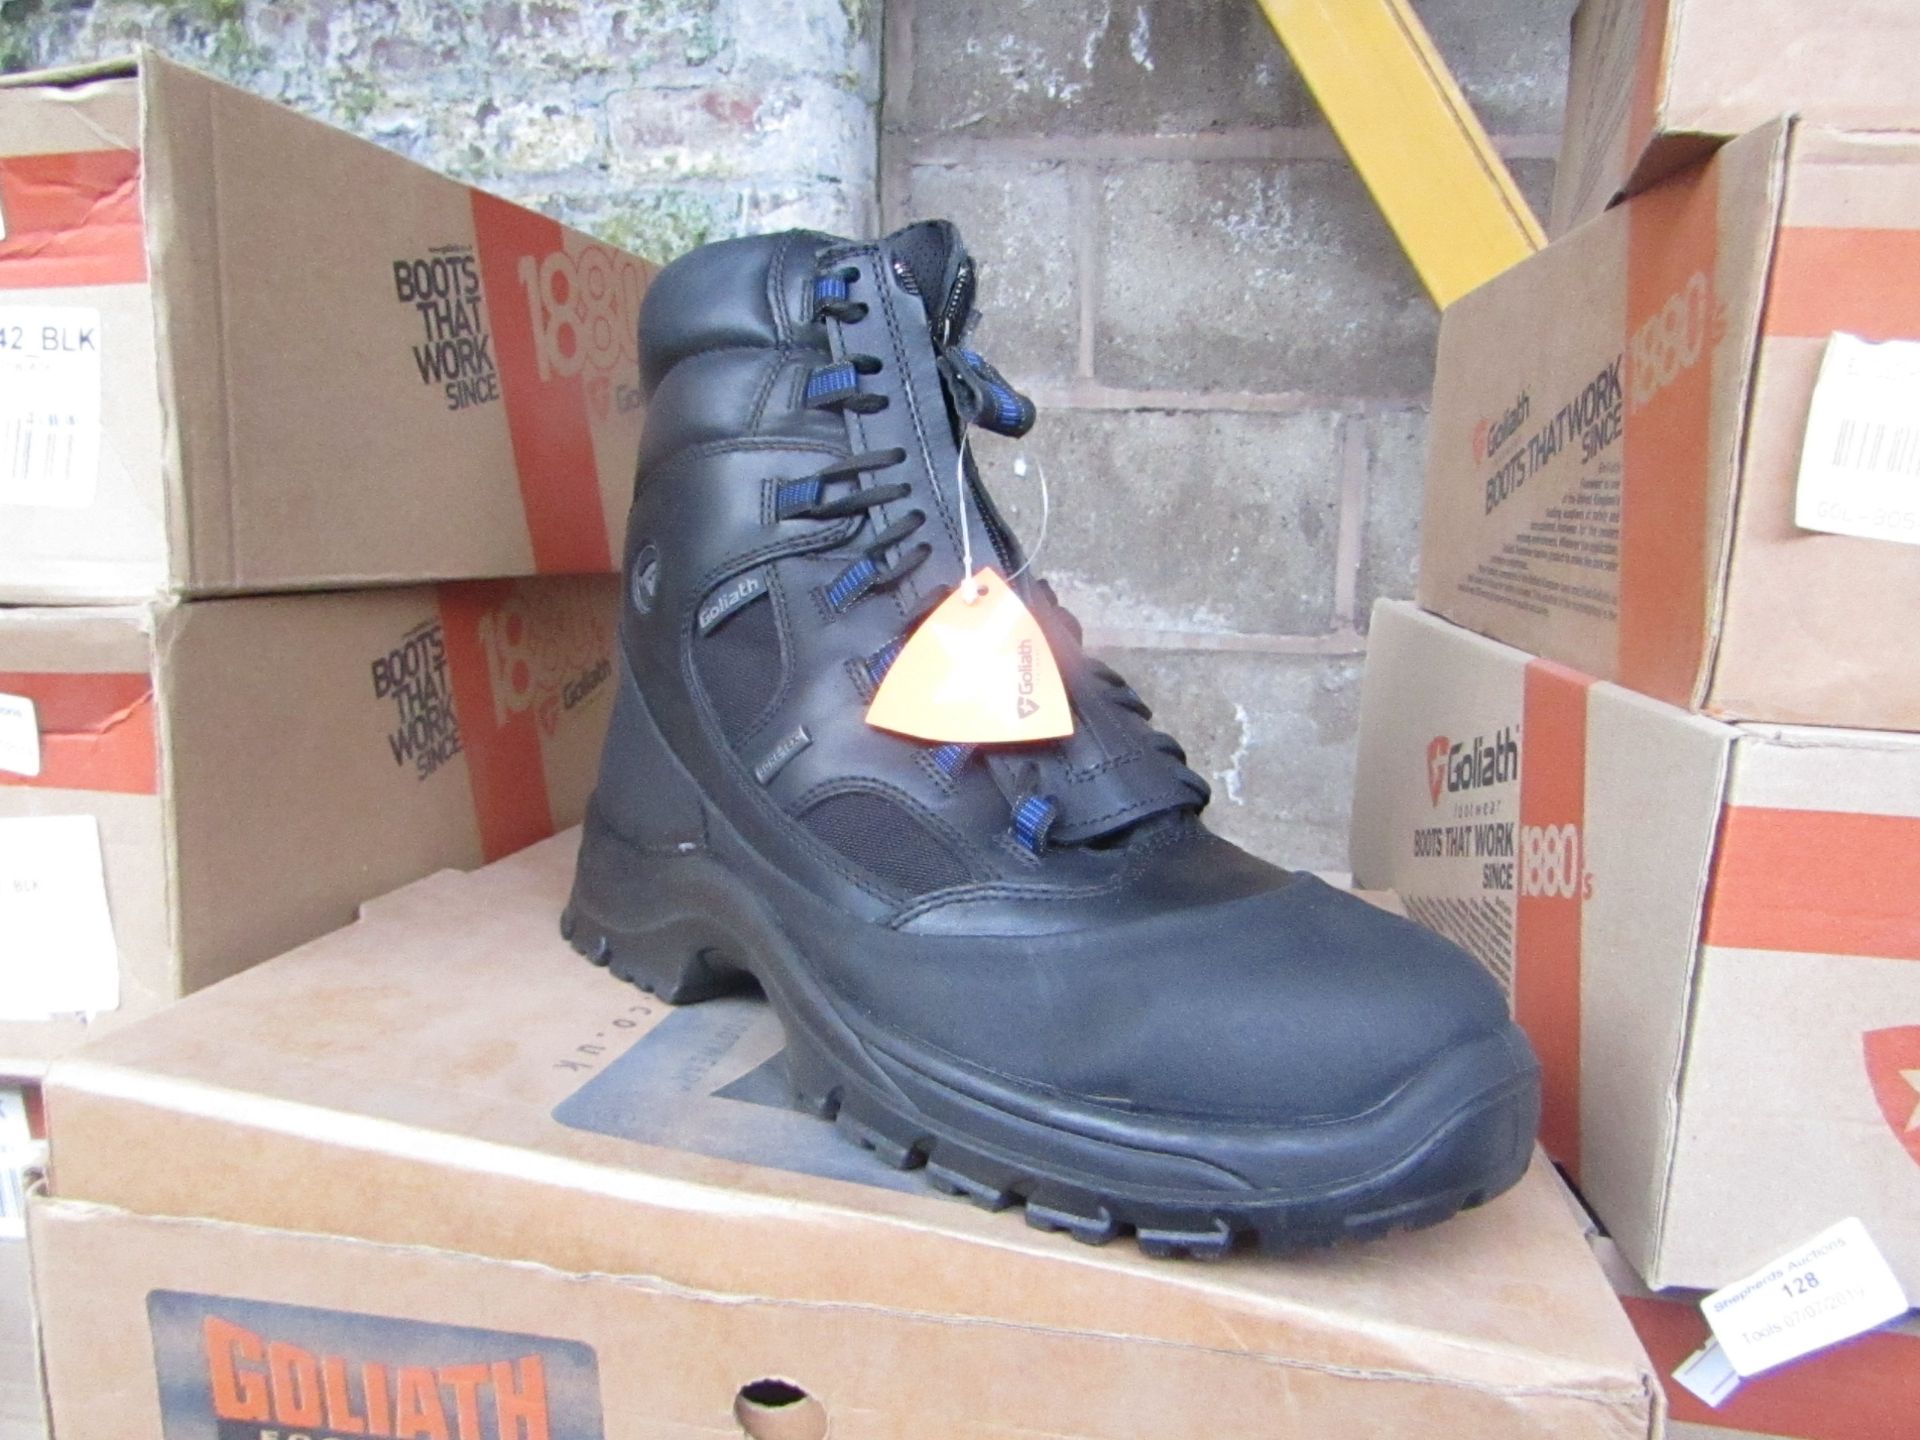 Goliath Line Walker Black Goretex Steel Toe Cap Safety Boots new and boxed, Size 7 RRP £67.49